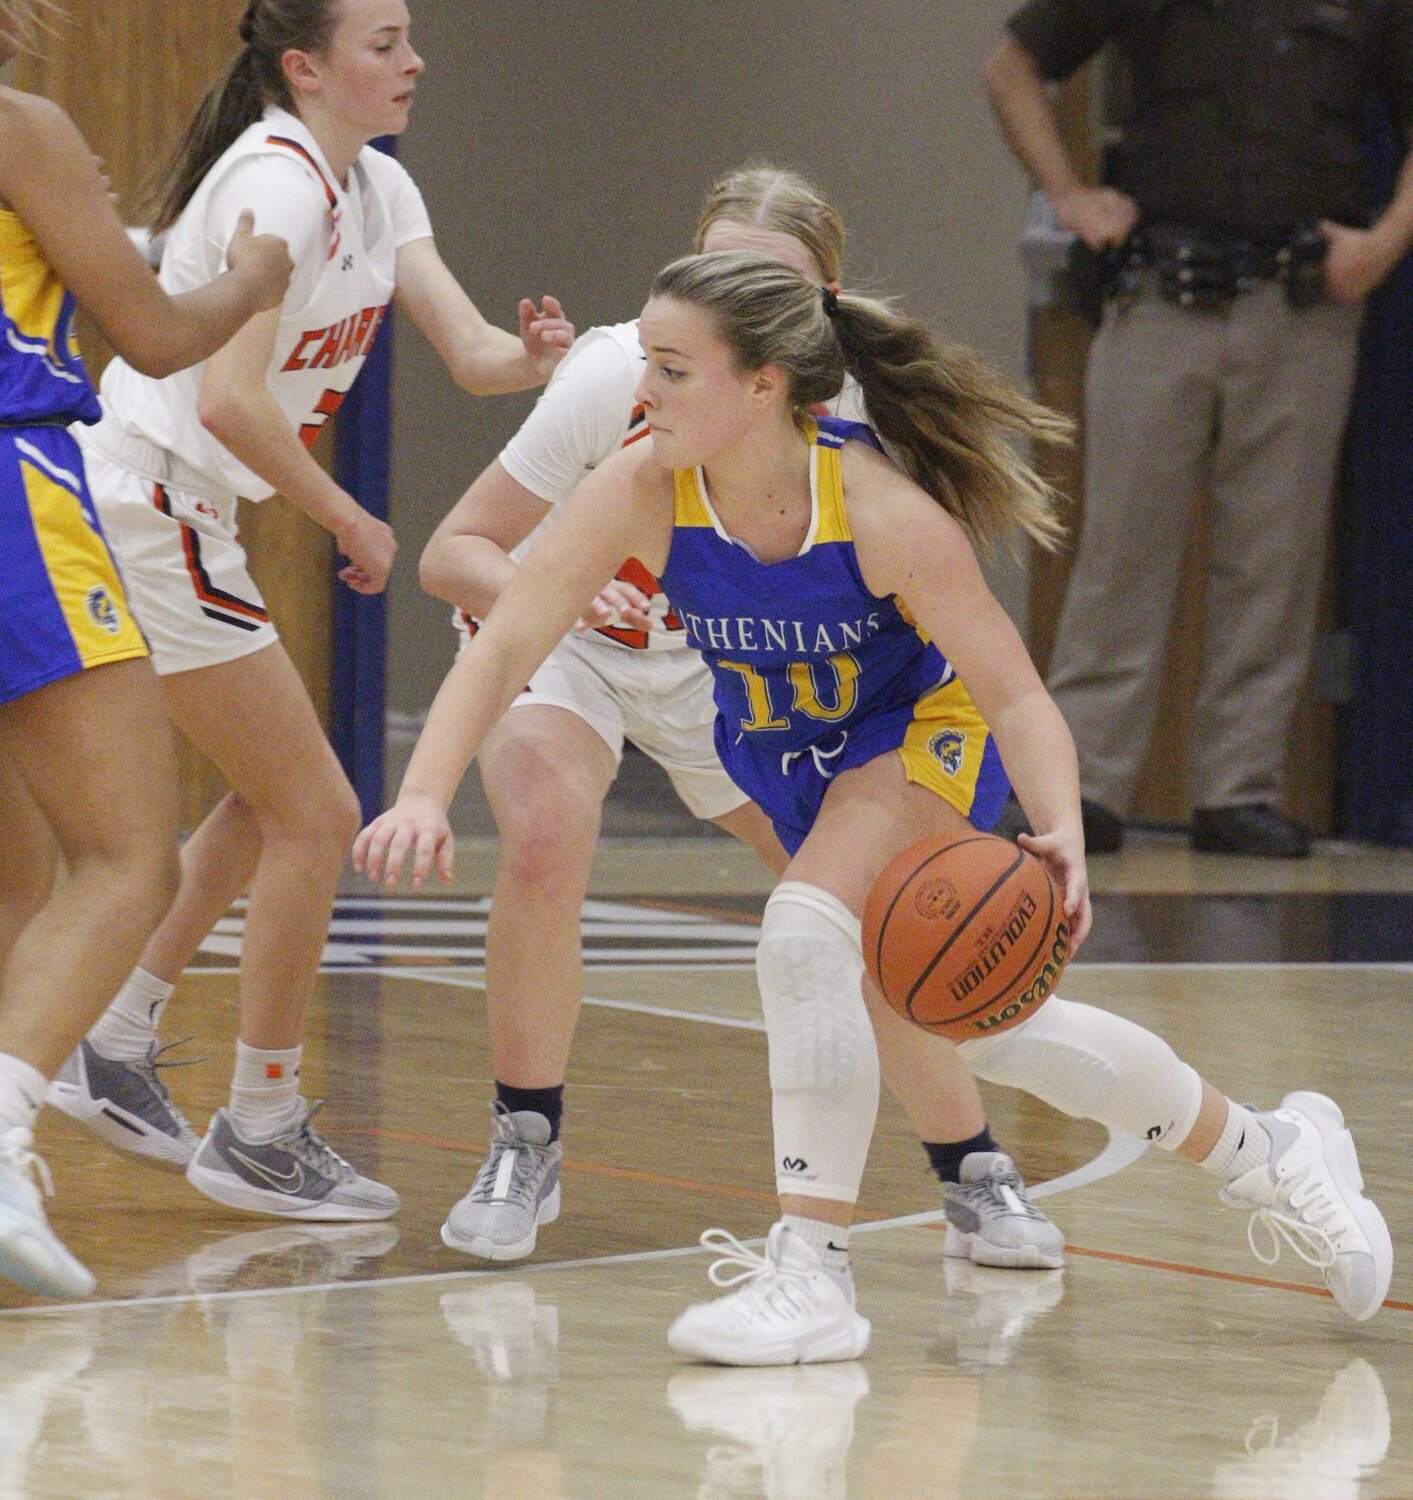 Cville sophomore Molly Pierce handles the ball on the perimeter for CHS.